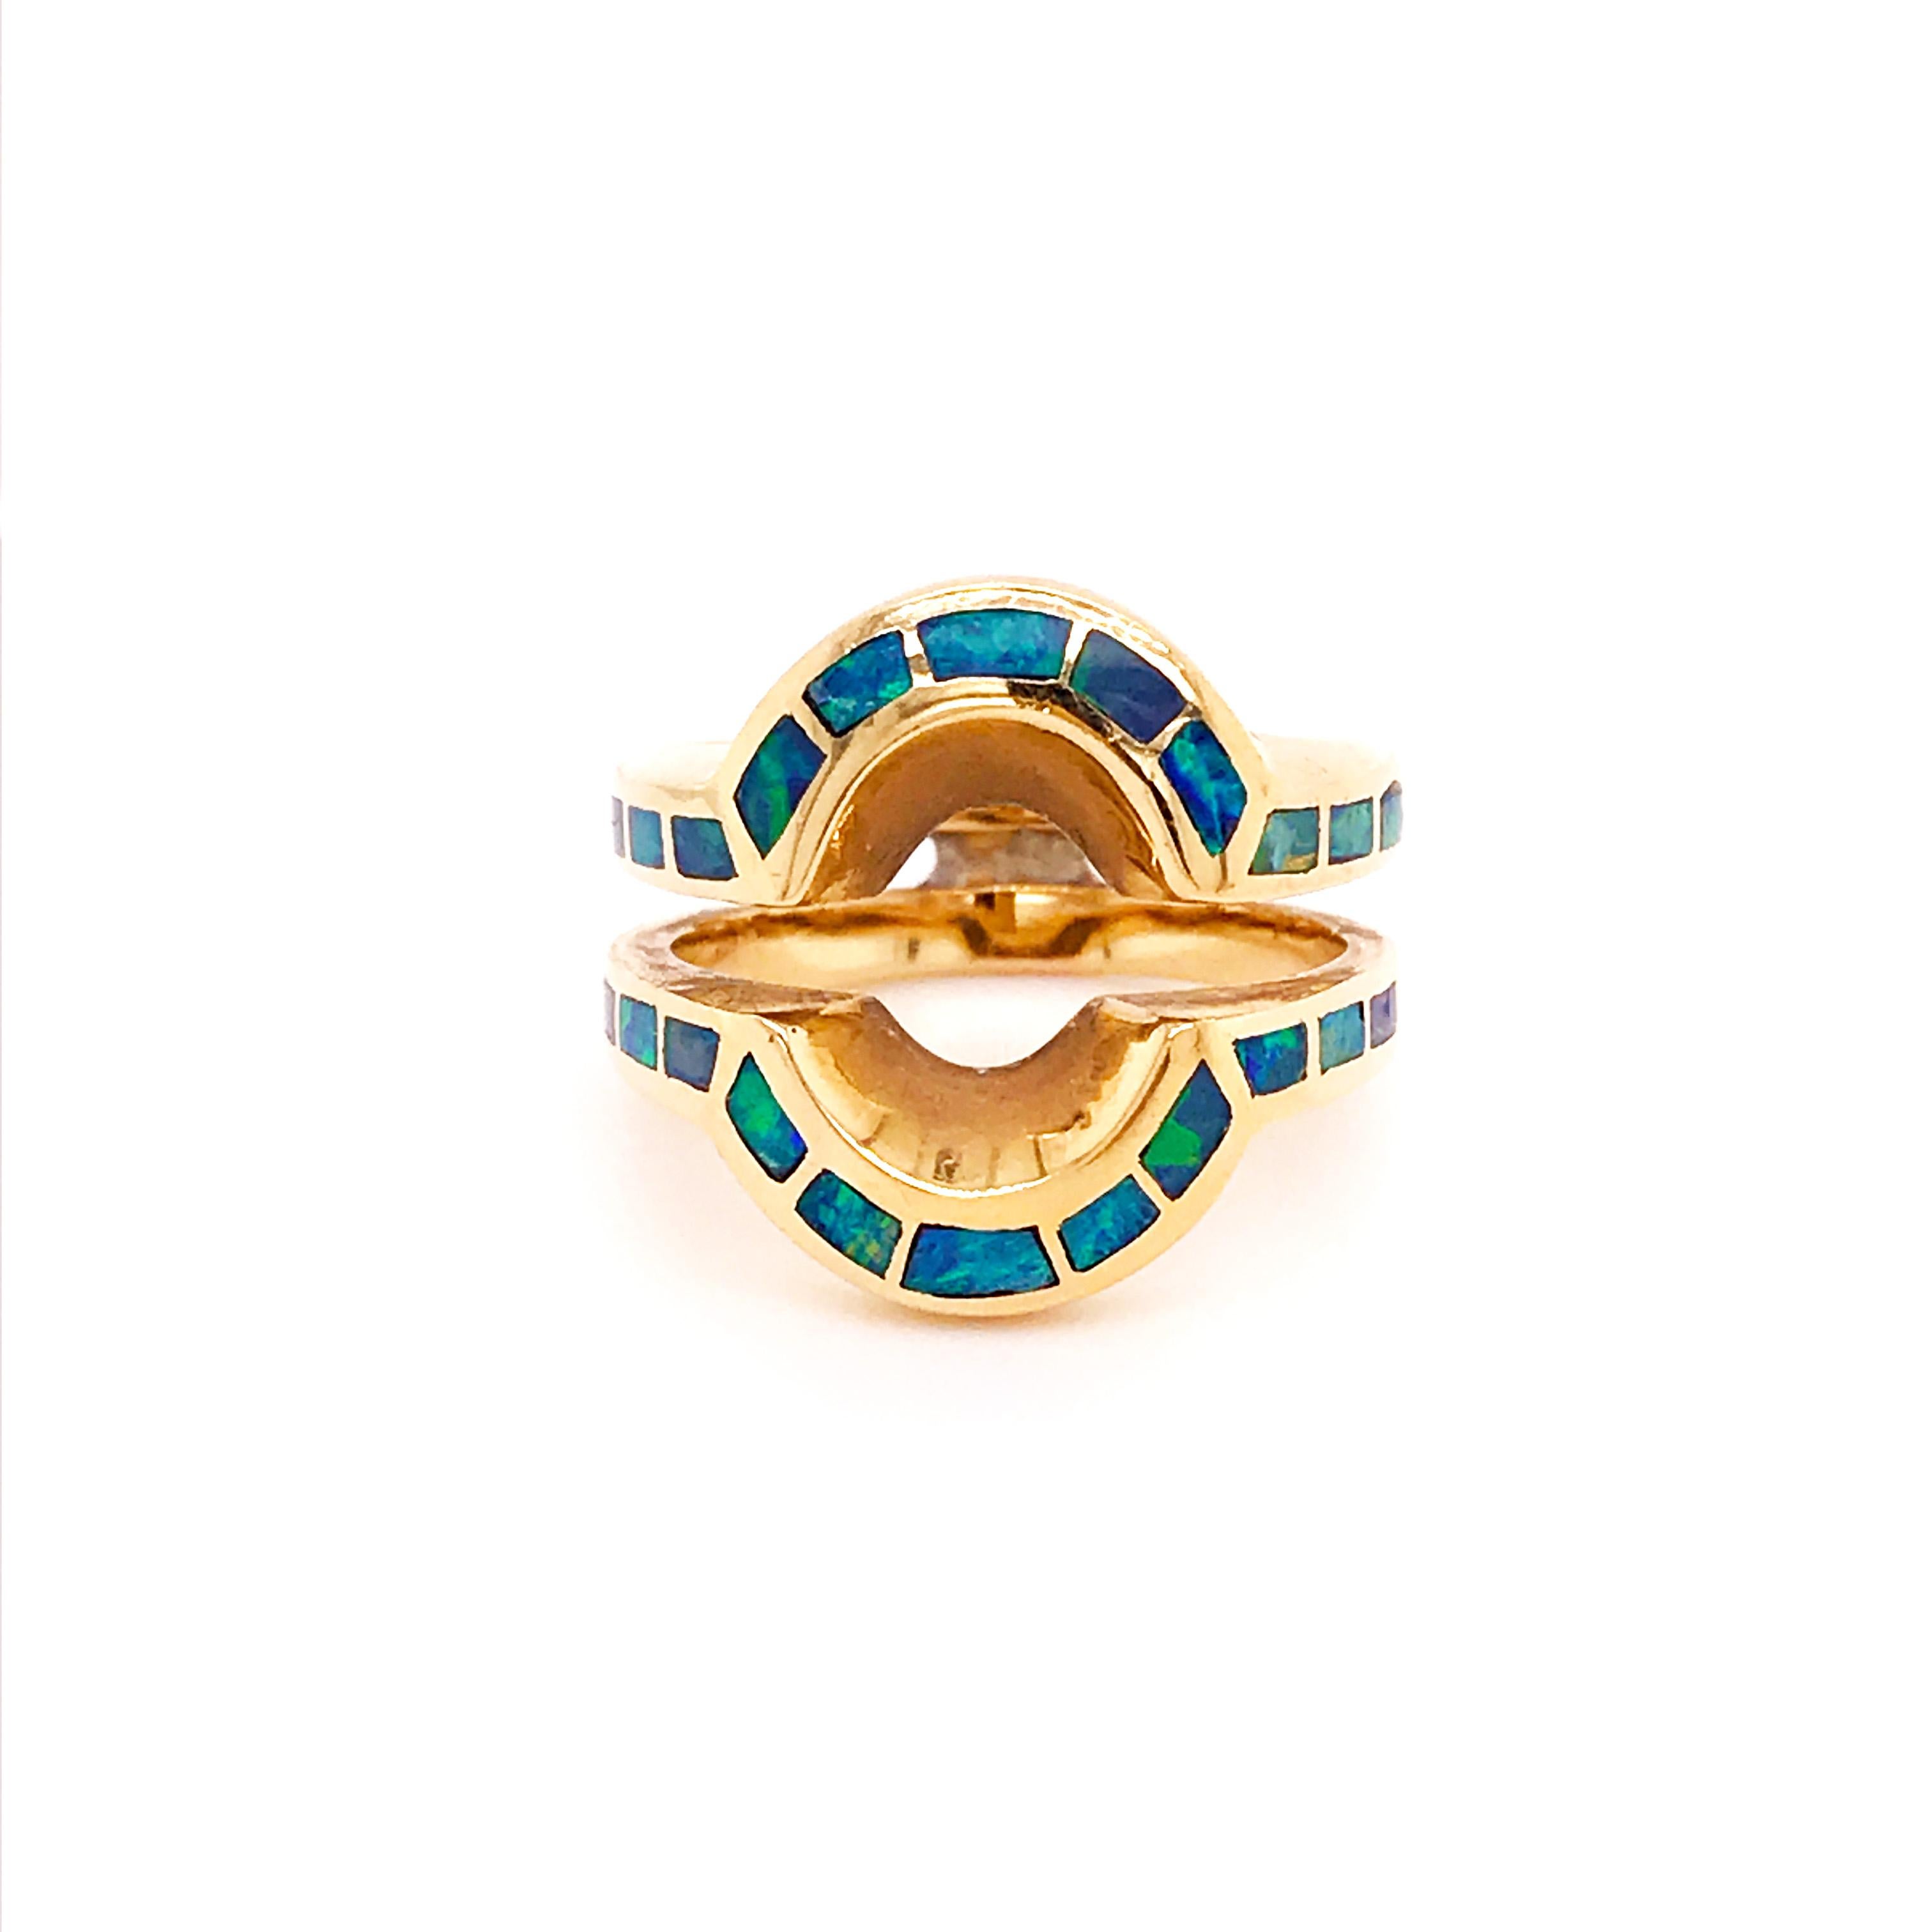 This estate ring enhancer ring guard is an original, one of a kind piece. With blue opal inlay on 14k yellow gold. Cutting opal to fit in an inlay ring takes special skills that most jewelers do not have.  This inlay was artfully done.  The deep